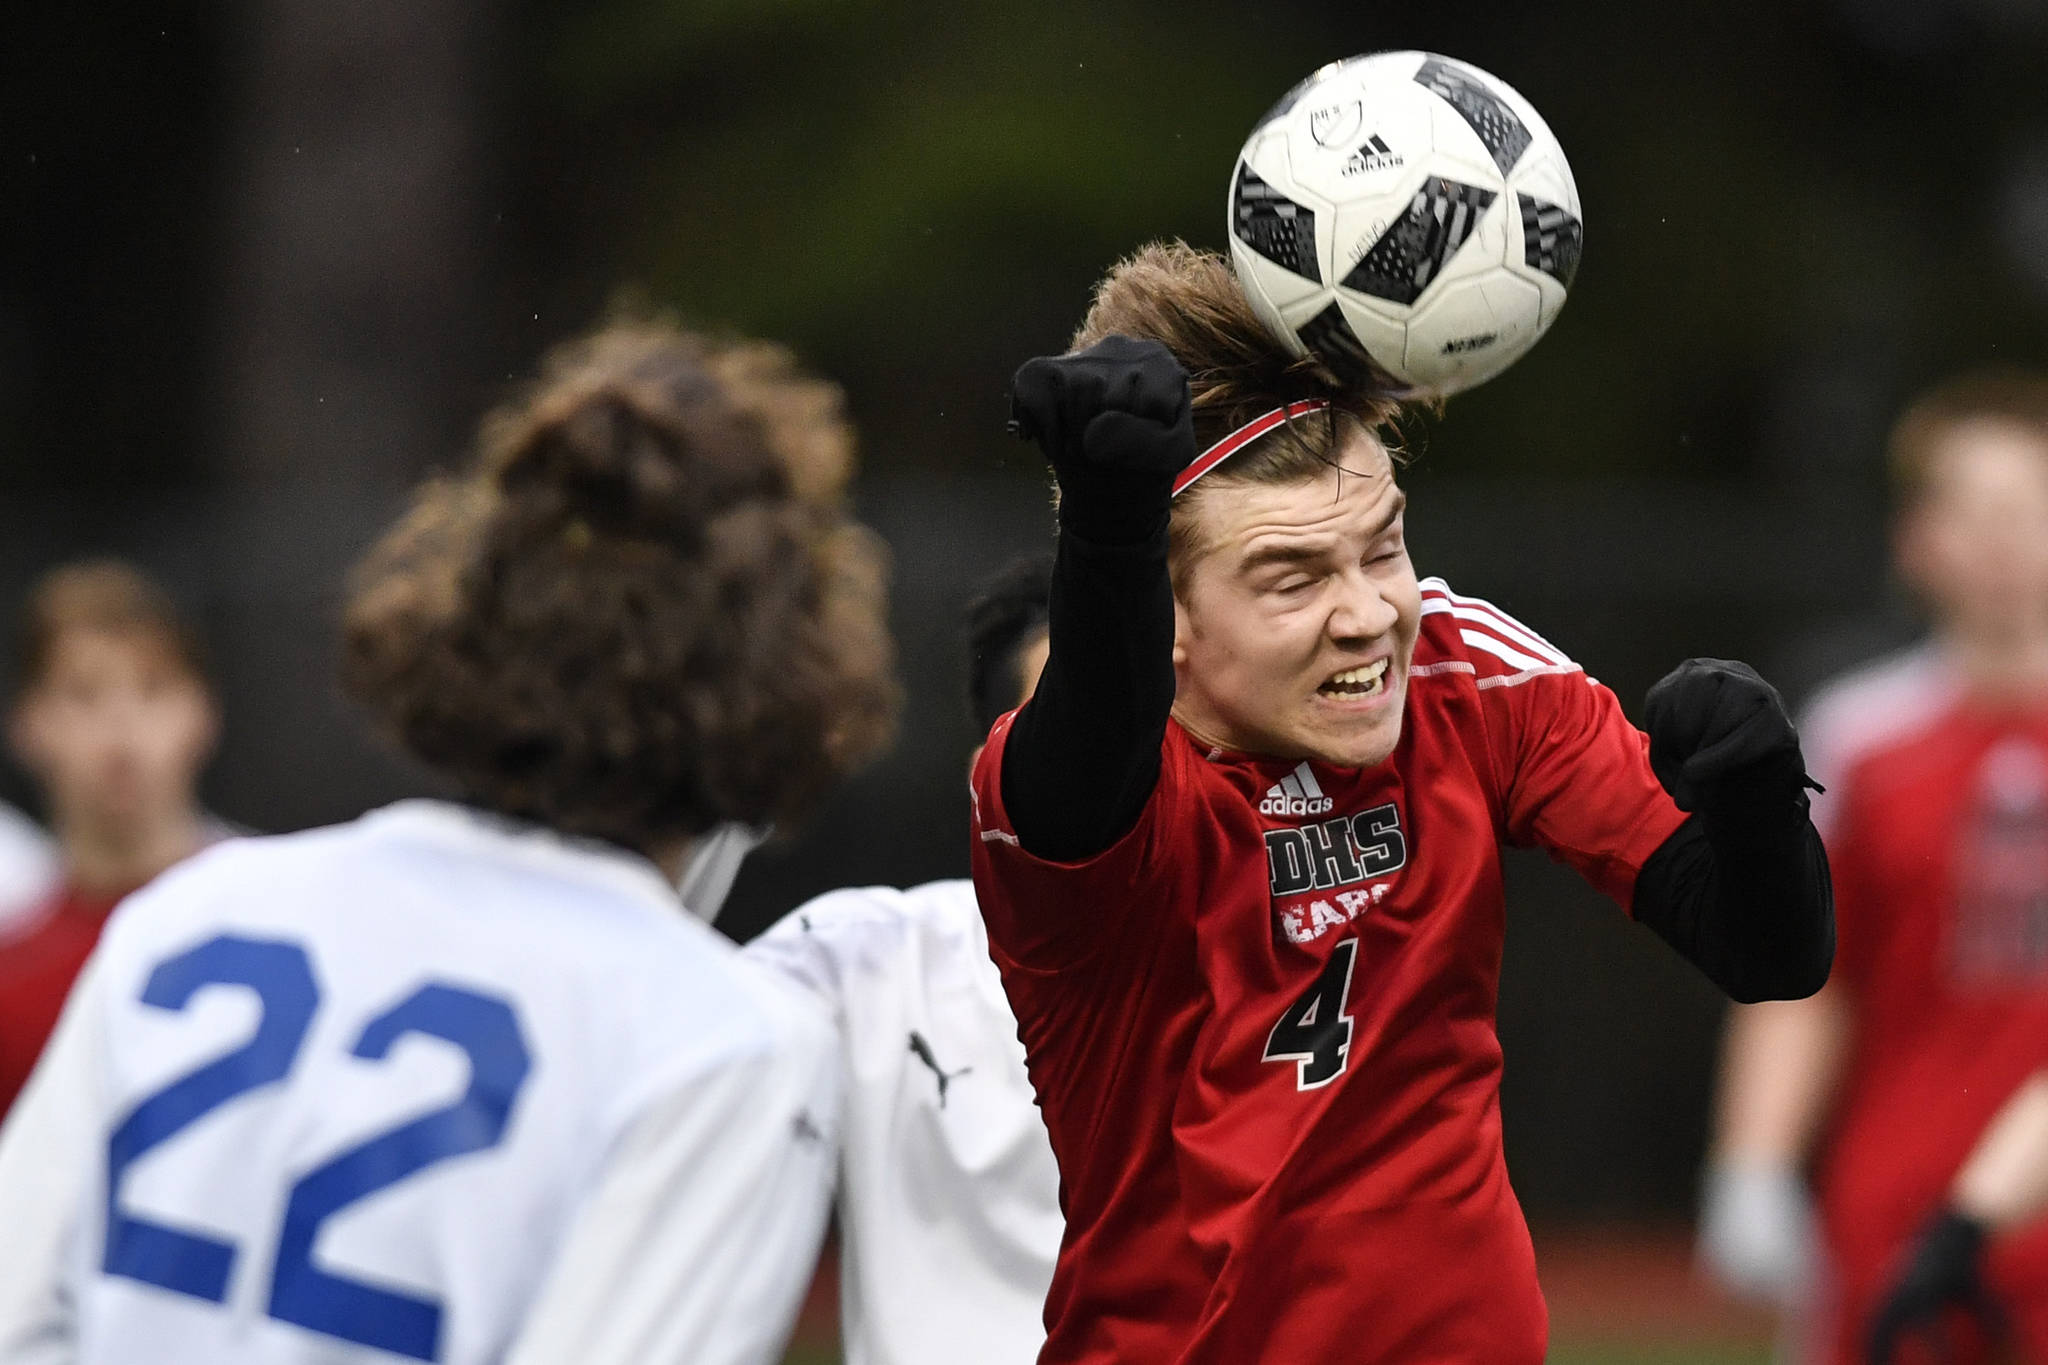 PHOTOS: Historic Night for Juneau Soccer